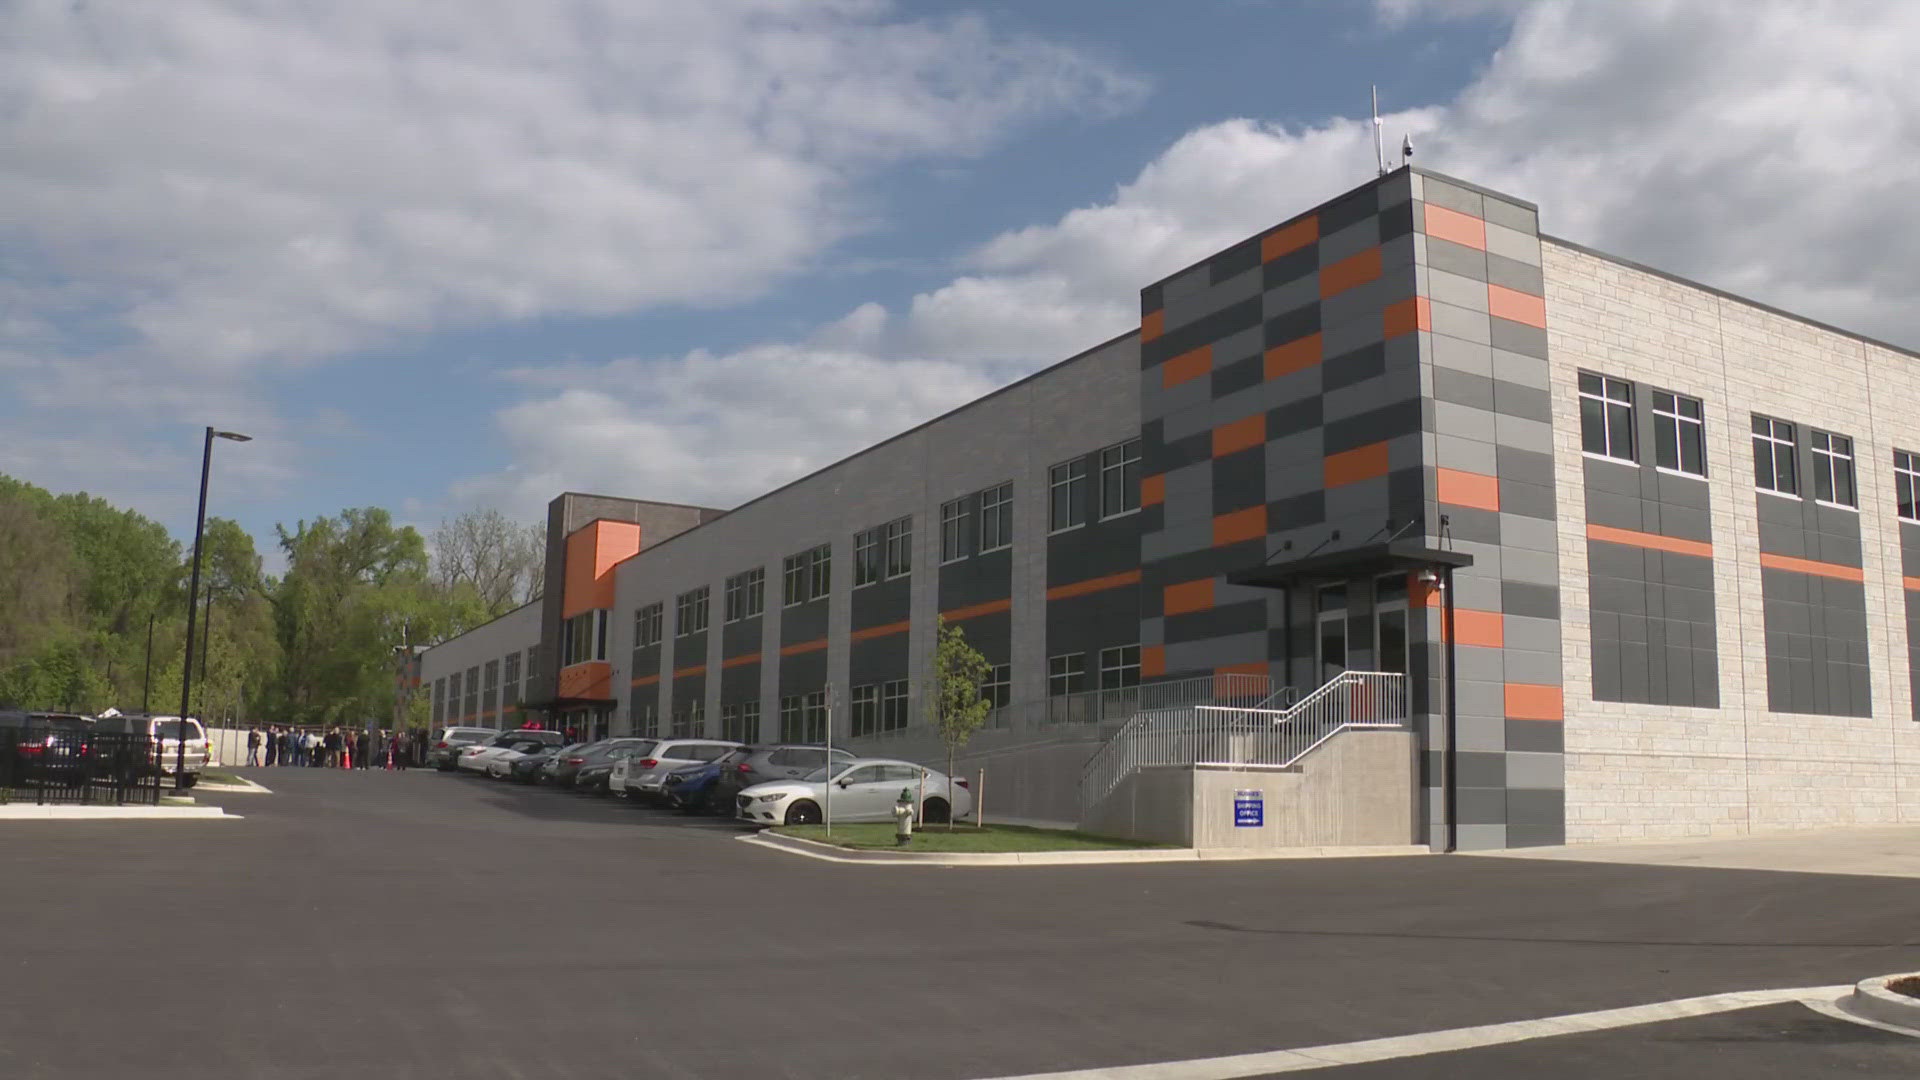 The Hughes Manufacturing facility is described as a state-of-the-art building that will work to revolutionize satellite broadband and networking equipment production